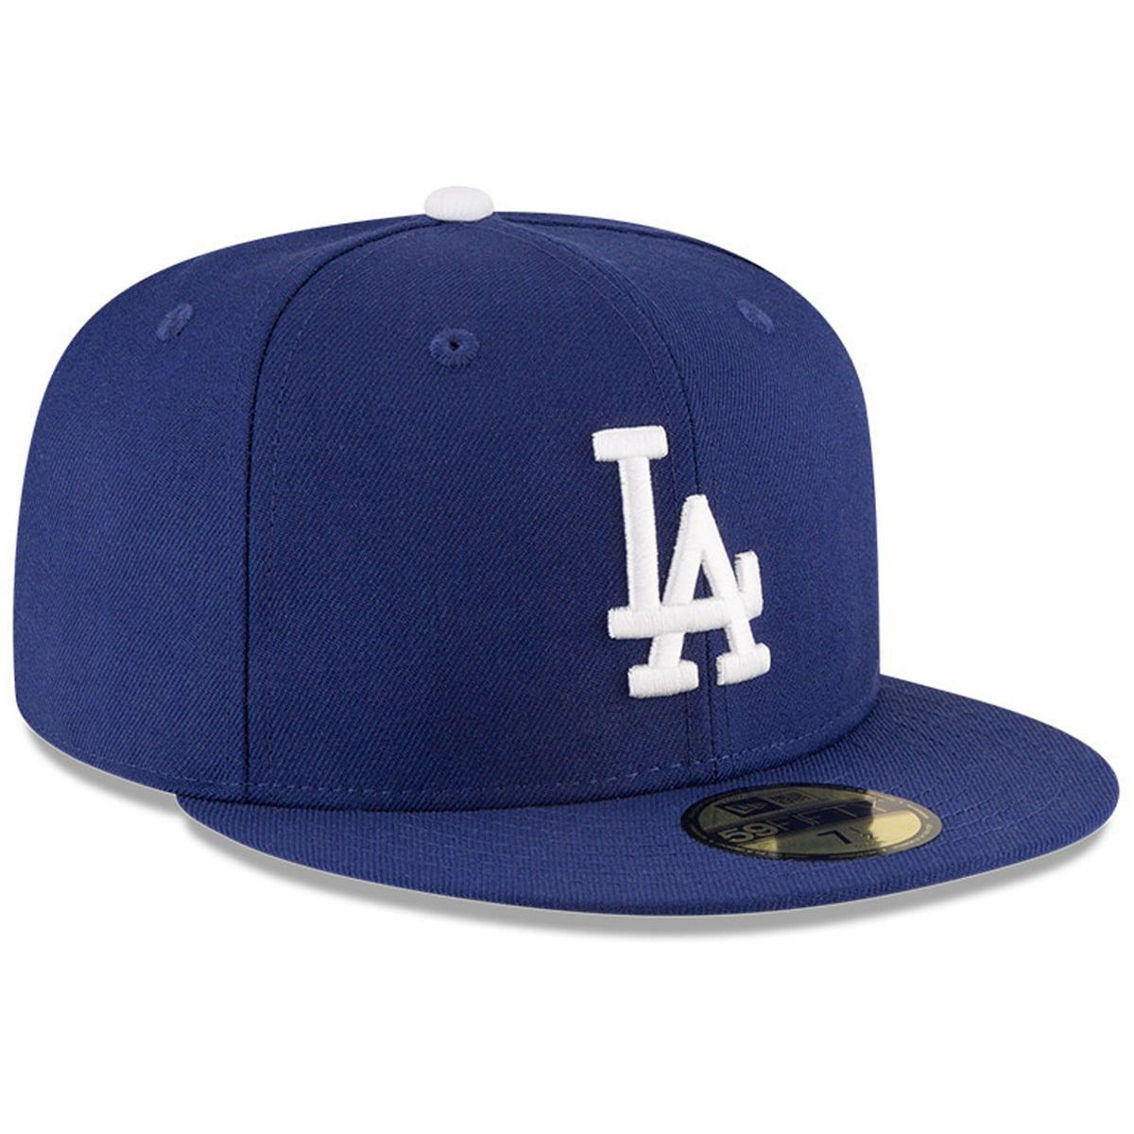 New Era Men's Navy Los Angeles Dodgers 1988 World Series Wool 59FIFTY Fitted Hat - Image 4 of 4